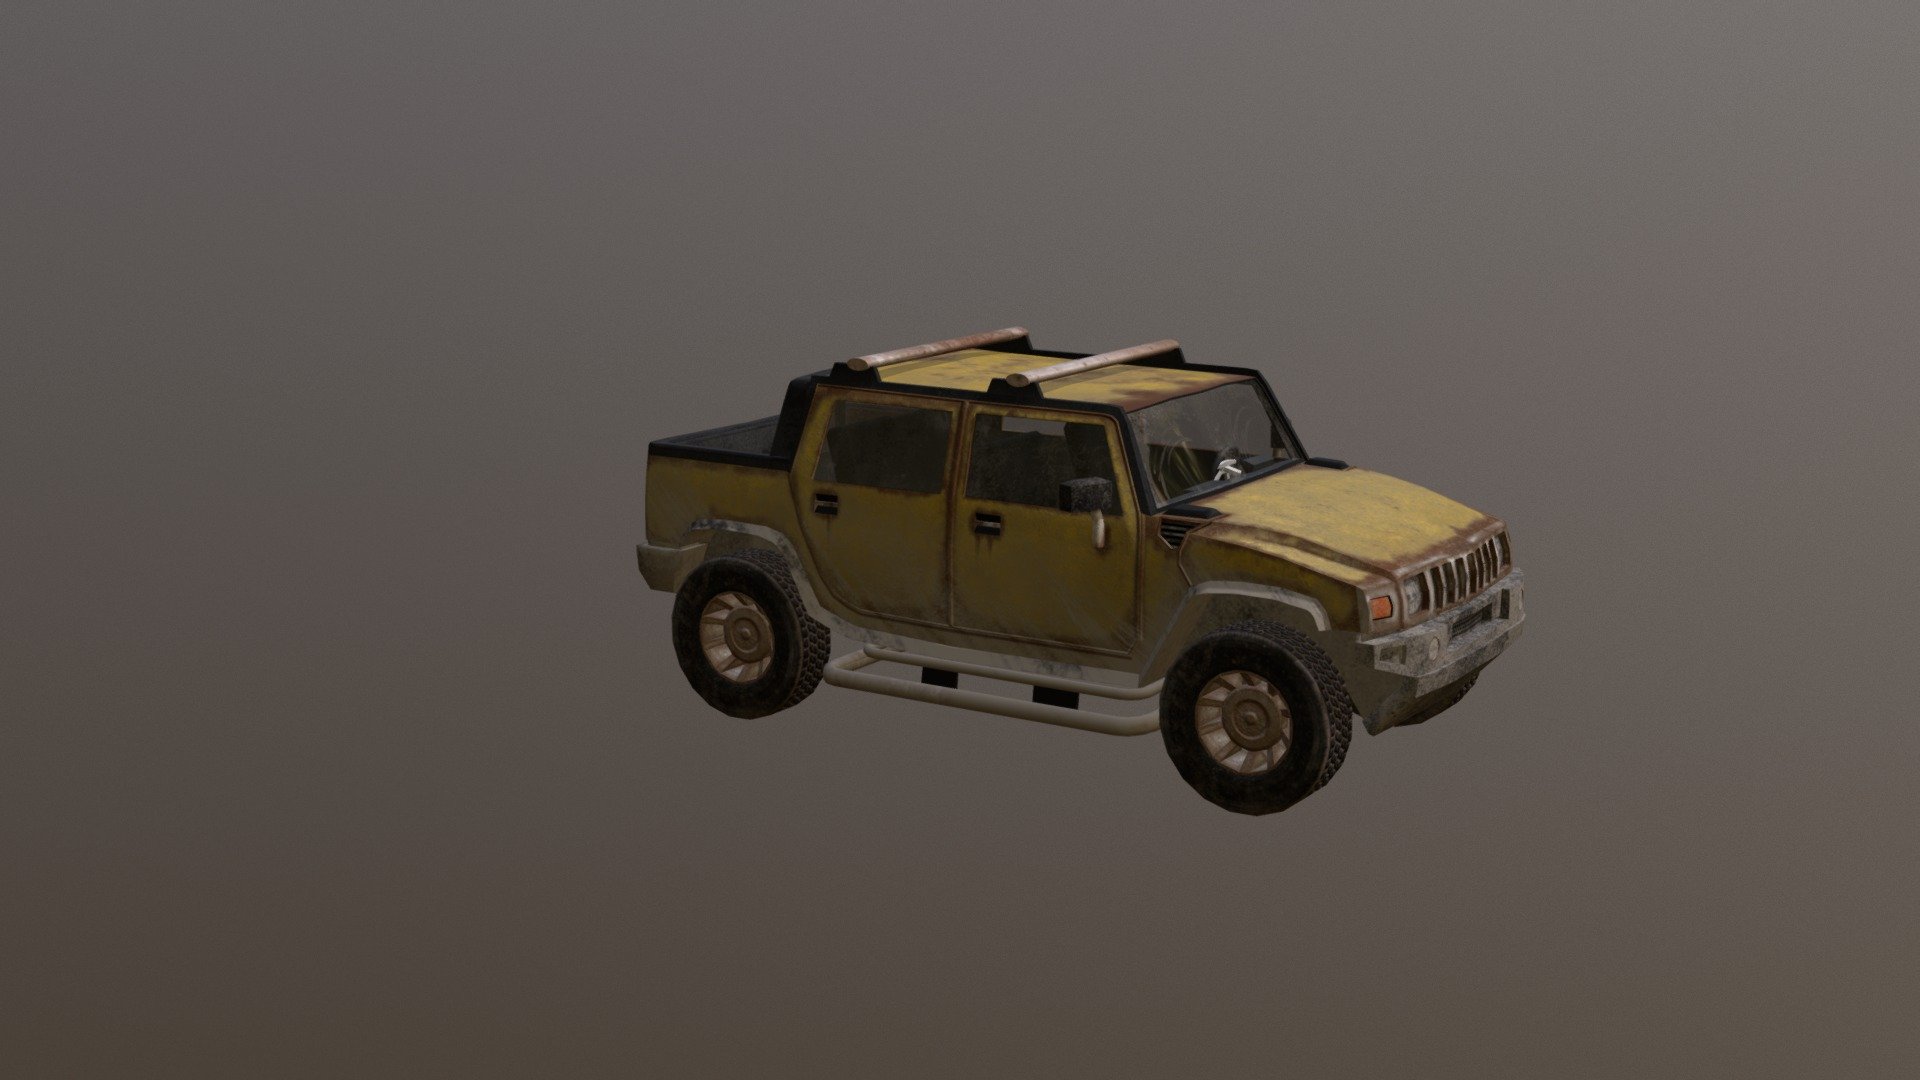 Hummer H3 Sut dirty and grunge.

Maybe ready to ride through some deserts - Veicolo - 3D model by EscapeArt 3d model